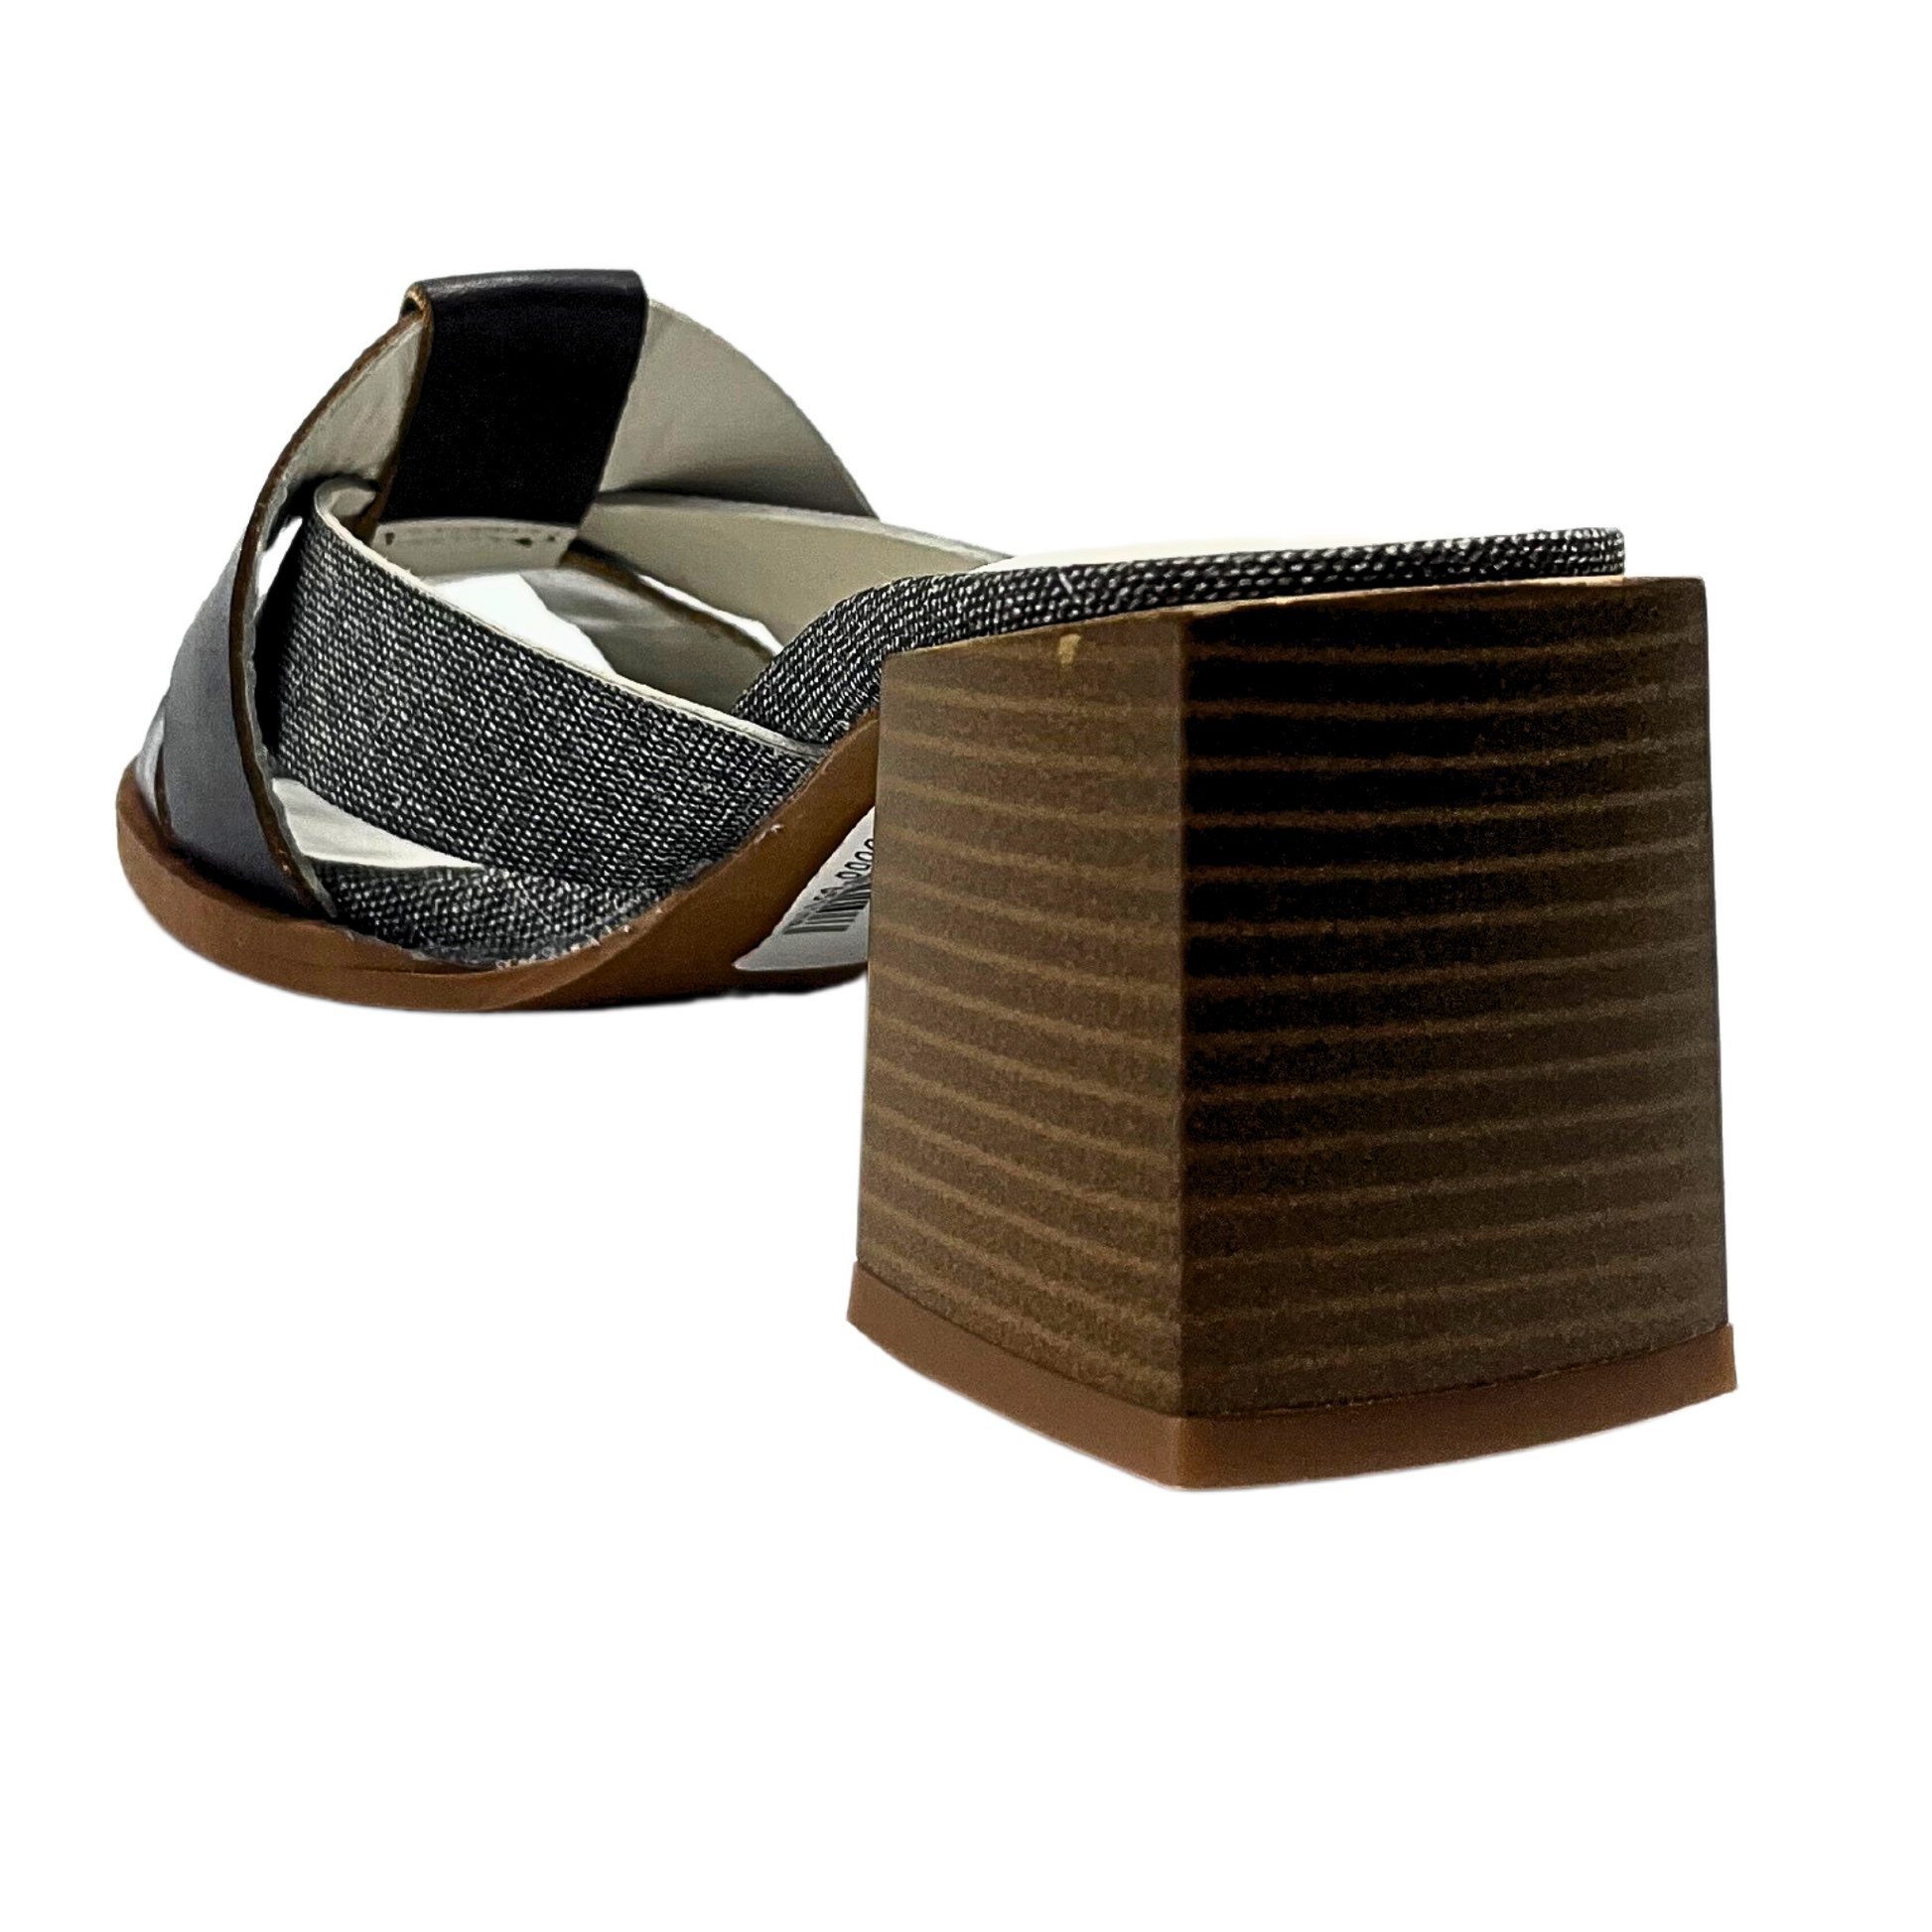 Angled rear view of Unity in Diversity Soraya.  Square block heel in a stacked wood 